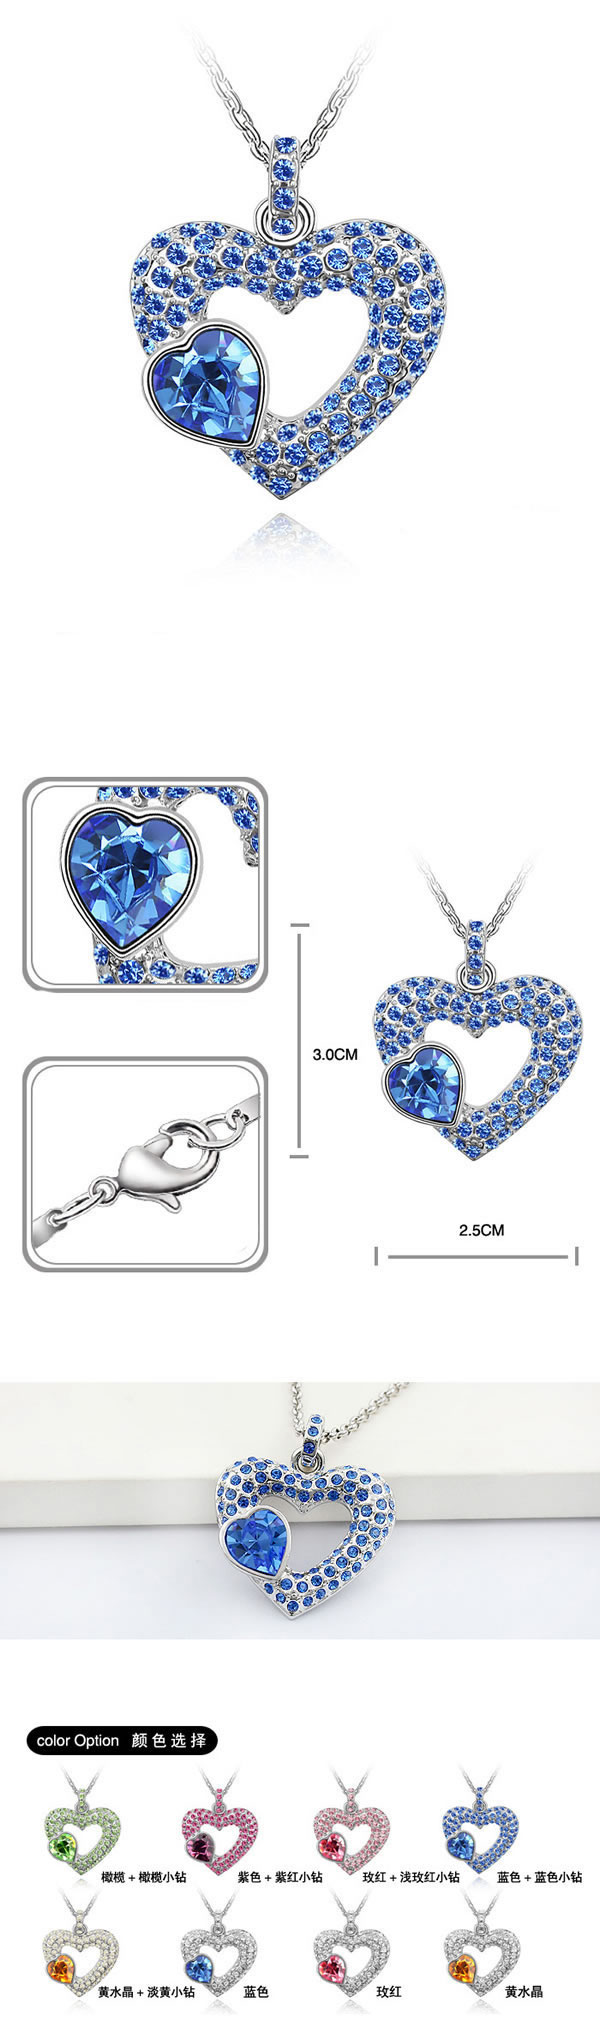 Fashionabl Blue Heart Xiang Xi Crystal Crystal Necklaces,Crystal Necklaces